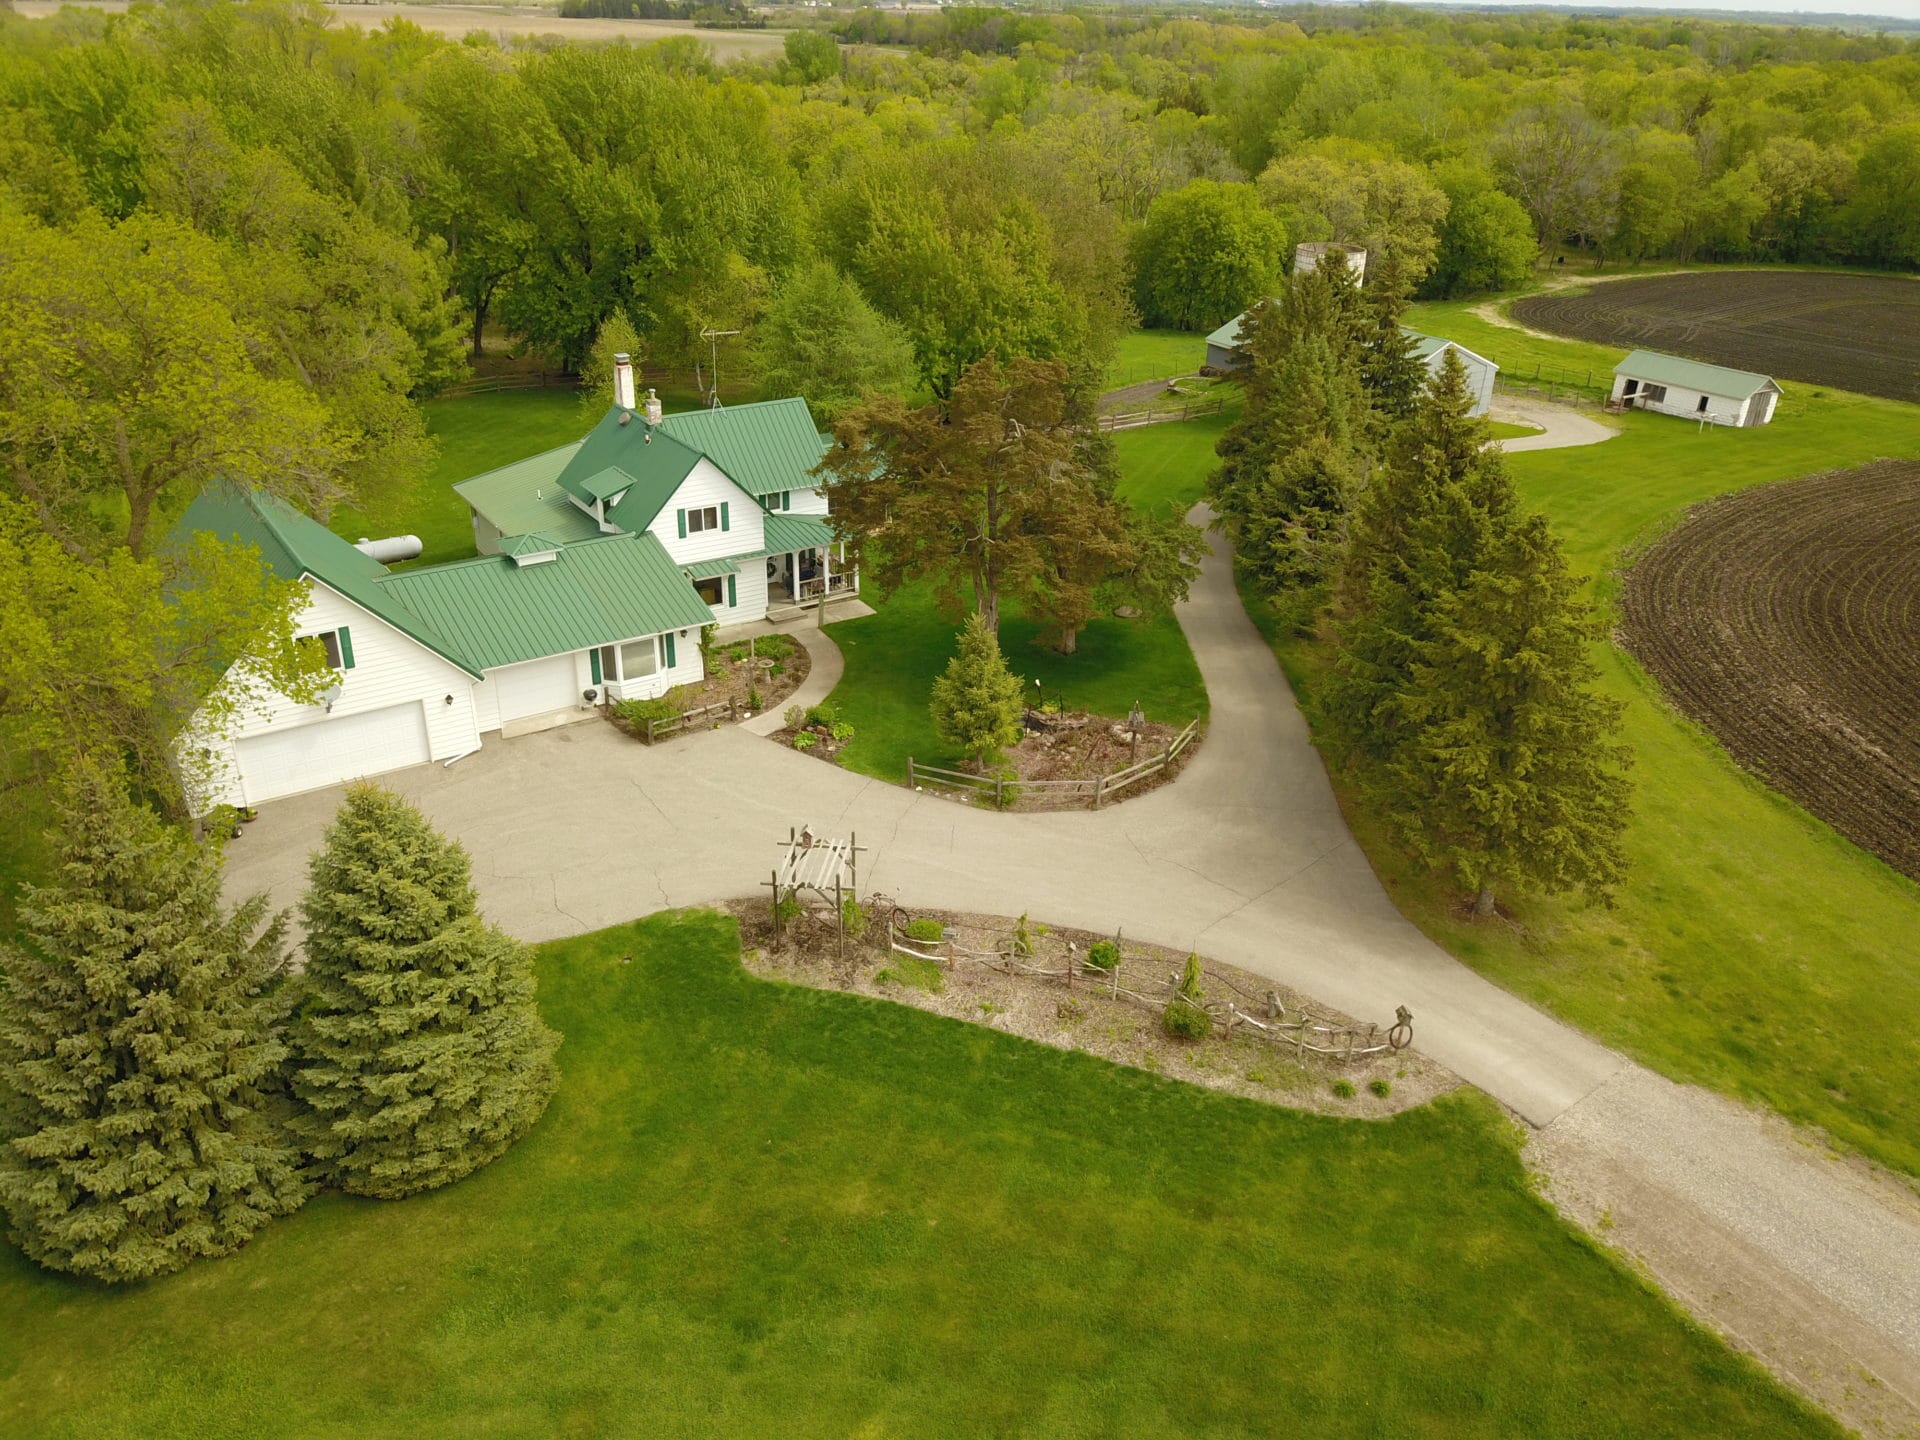 Arial View Of Farm House